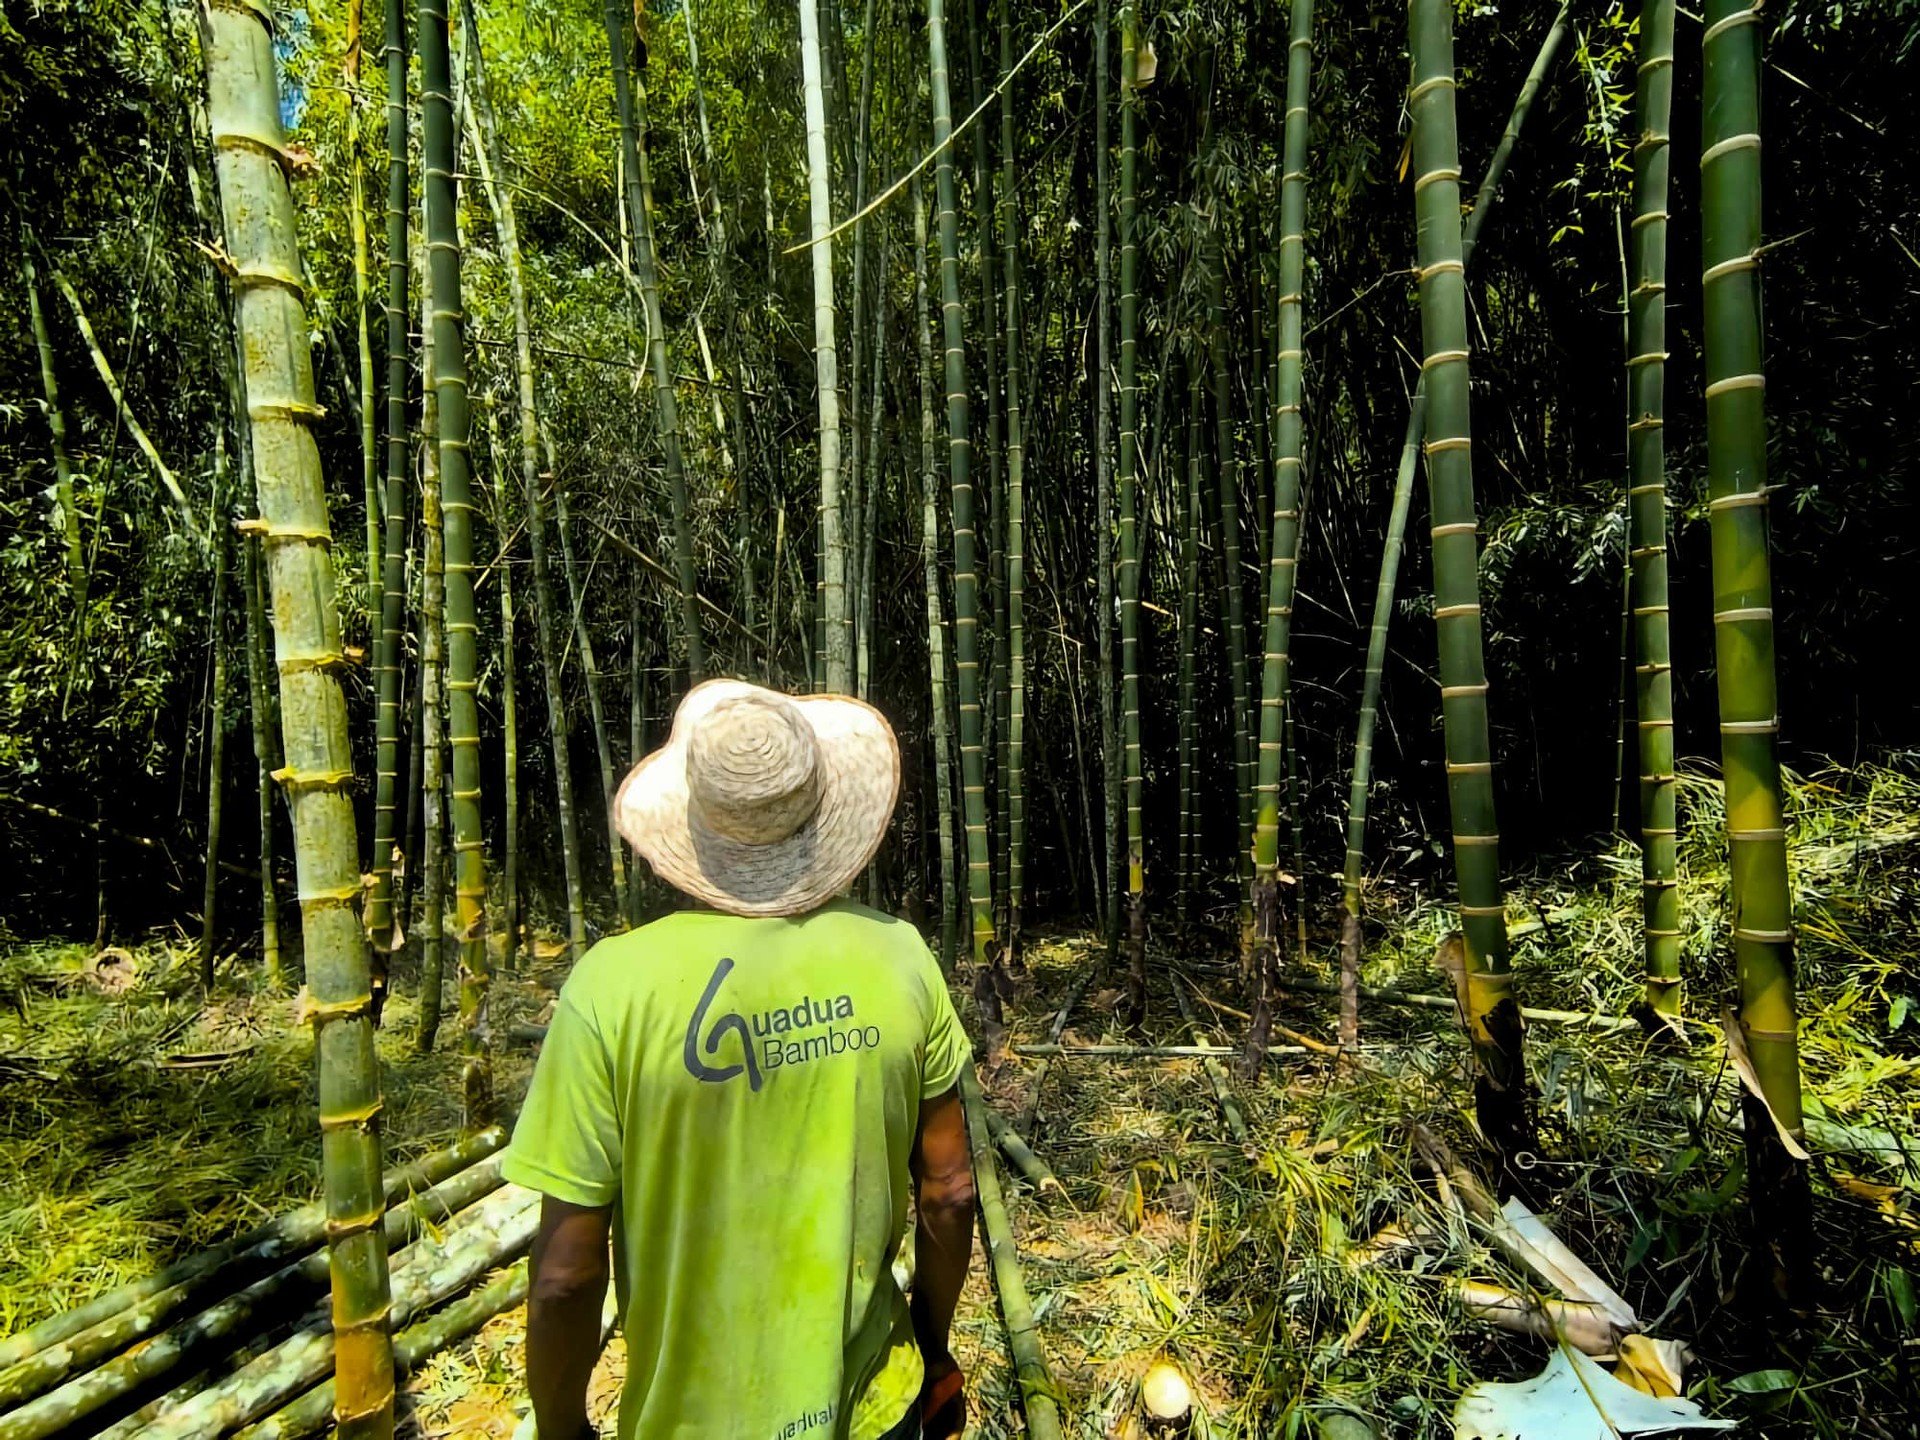 Carbon Credits don't work for small farmers, only for large corporations and banks investing in damaging monocultures around the world. 

Forest conservation is all about selective harvesting with respect for nature and its biodiversity. Only when fo